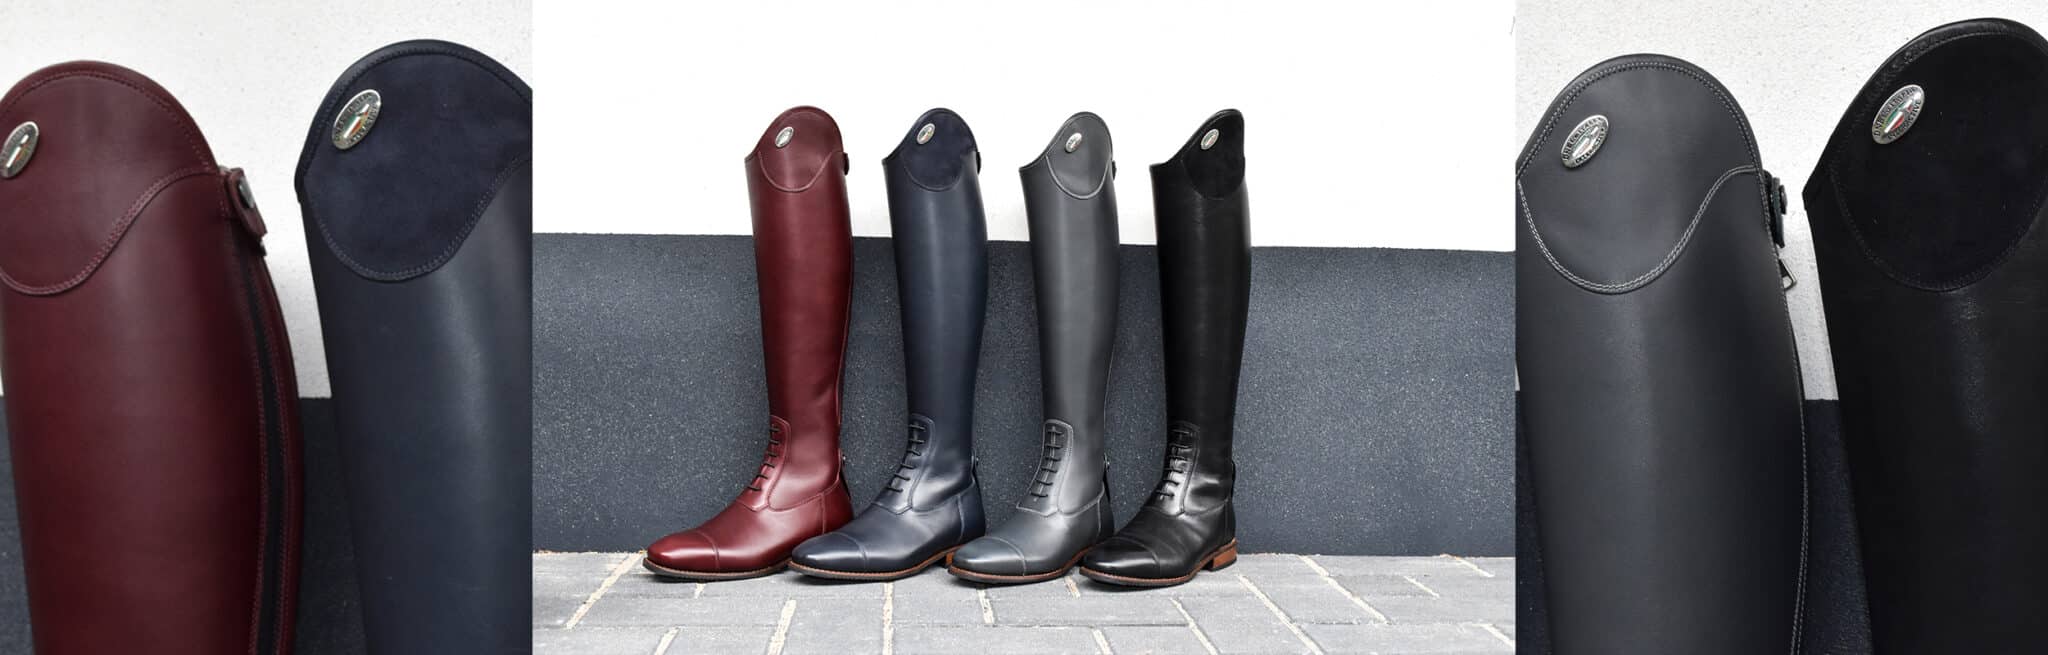 At MyRidingBoots.com, we're passionate about providing equestrians with the highest quality riding gear, tailored to their unique preferences. It's our pleasure to introduce you to De Niro Boot Co.'s Salento model, an embodiment of excellence that we've carefully selected to elevate your riding experience to new heights.